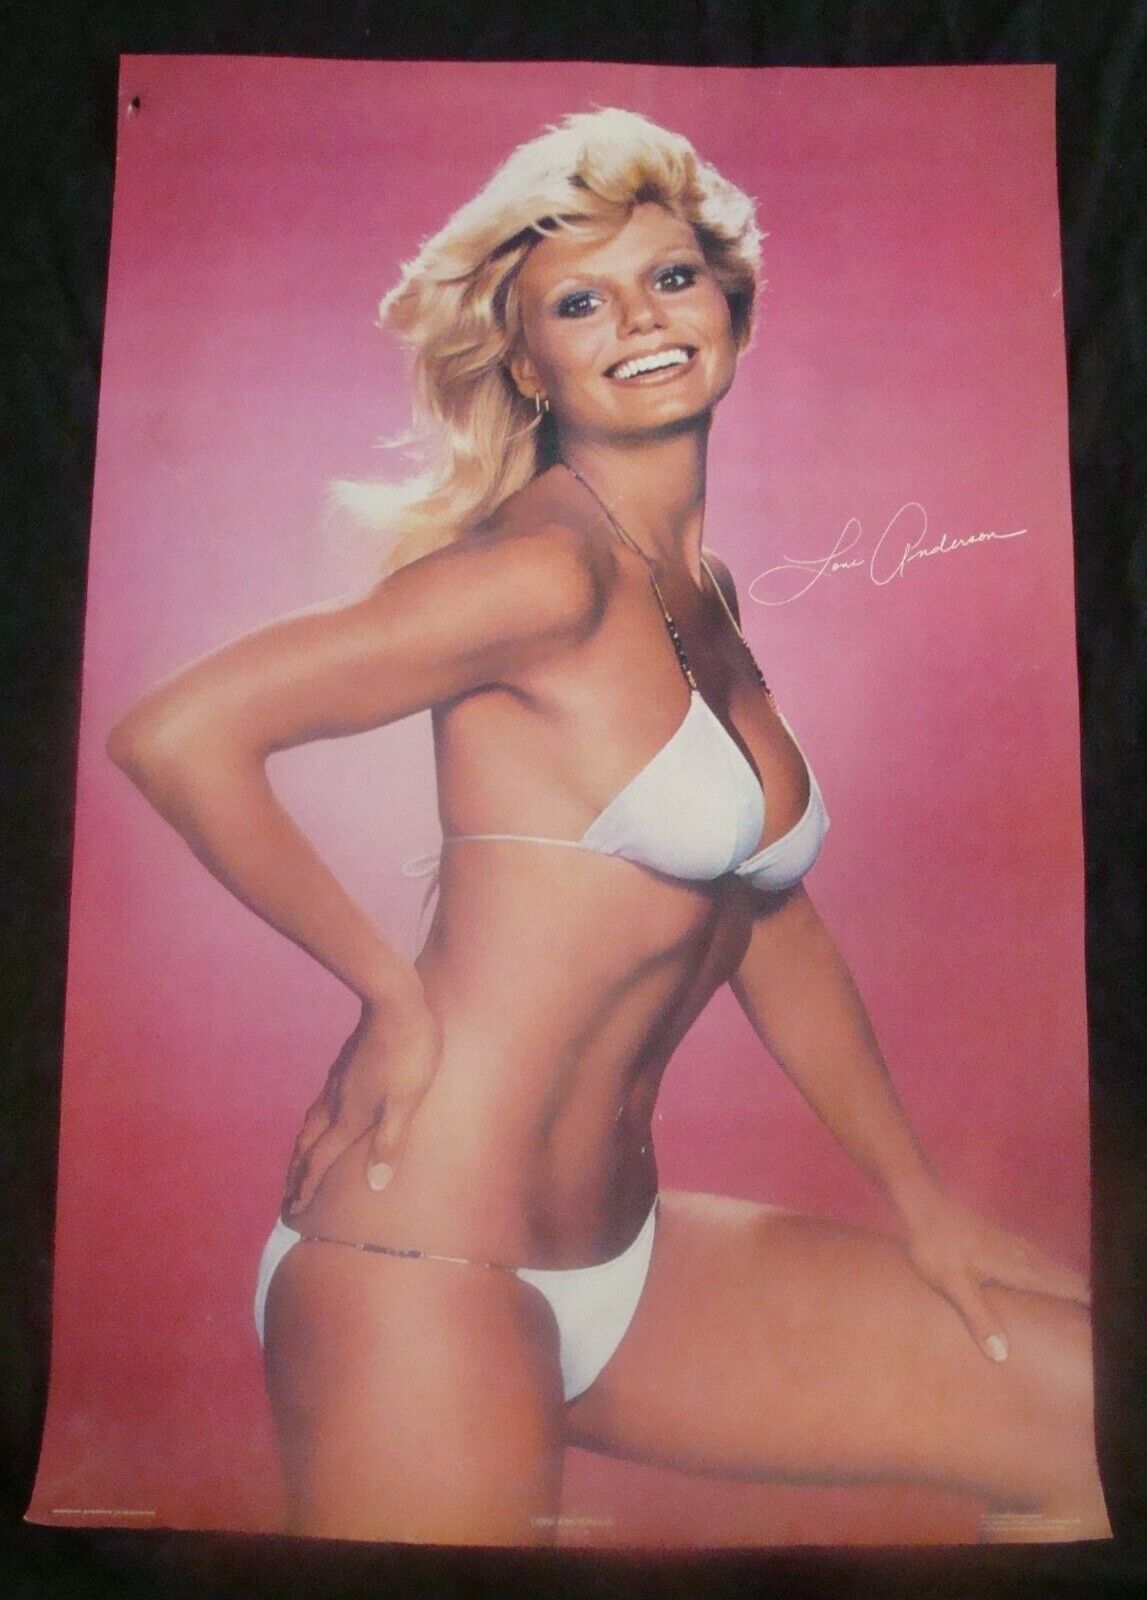 Loni Anderson Poster White Bikini Original Commercially Produced Poster 1978 Wes